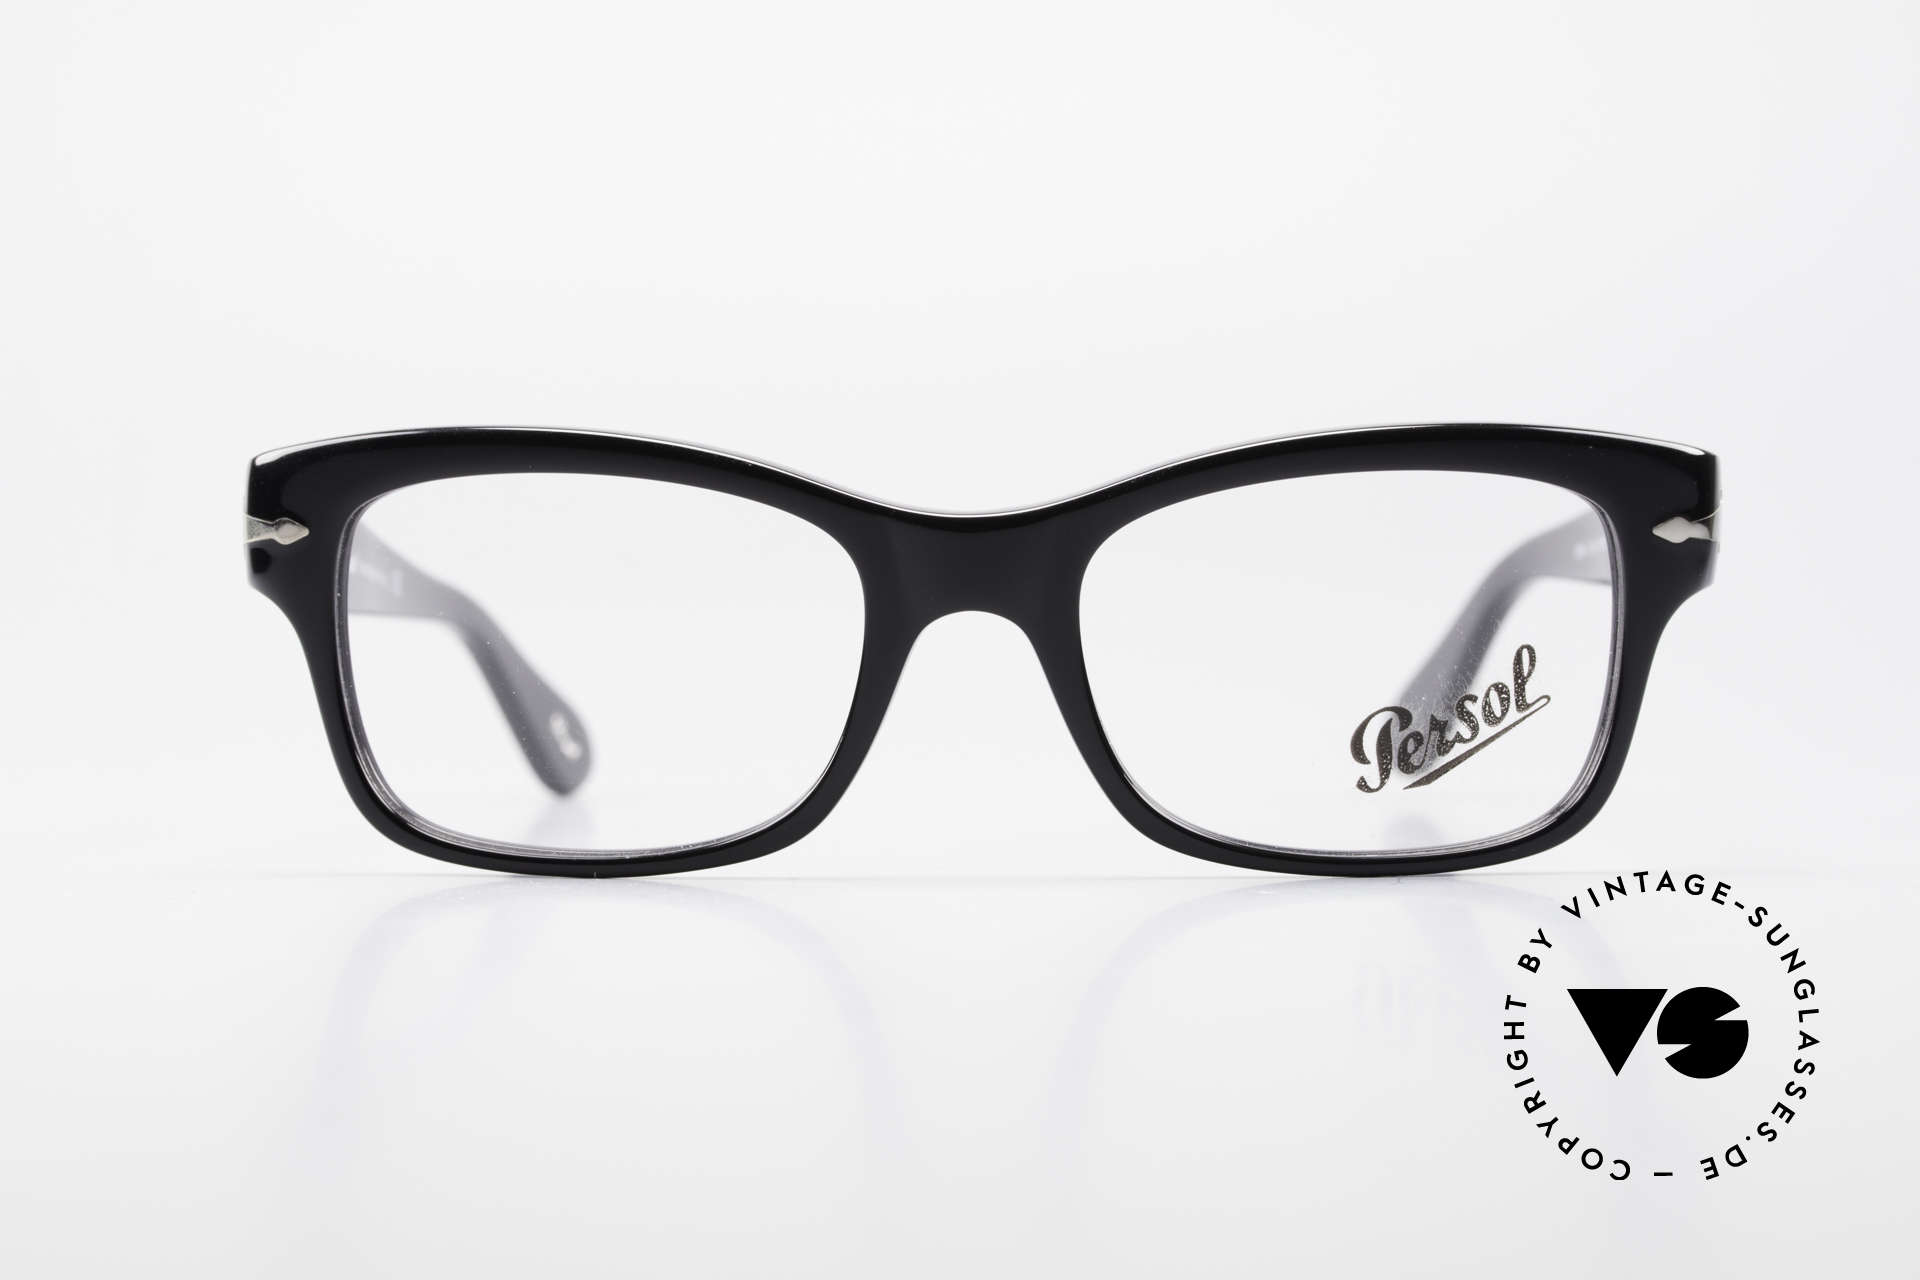 Persol 3054 Vintage Glasses Classic Frame, classic timeless design and best craftsmanship, Made for Men and Women